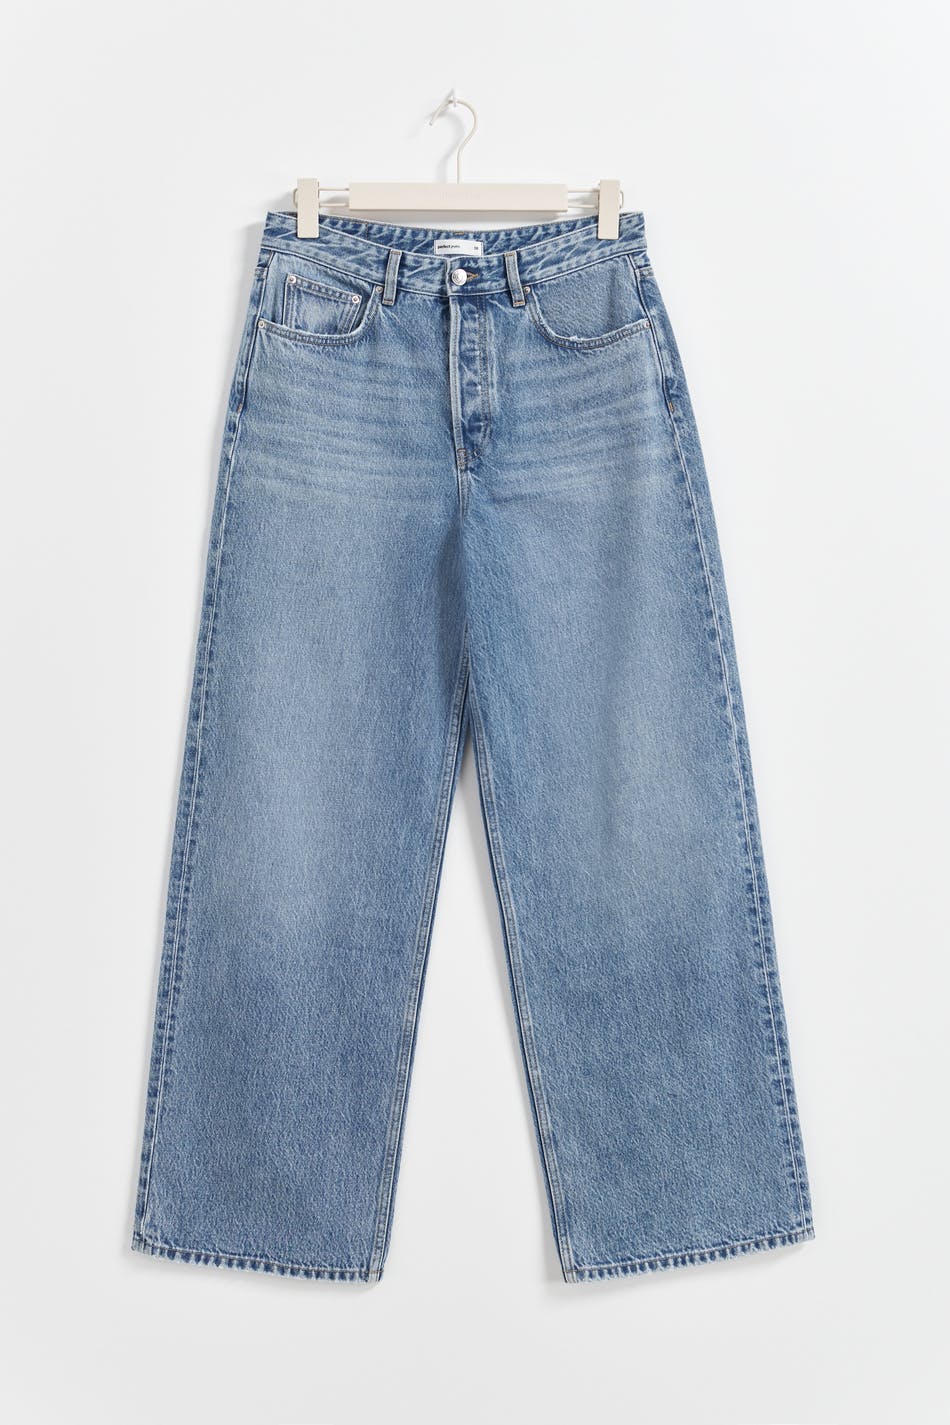 Gina Tricot - Baggy tall wide jeans - loose jeans - Blue - 36 - Female